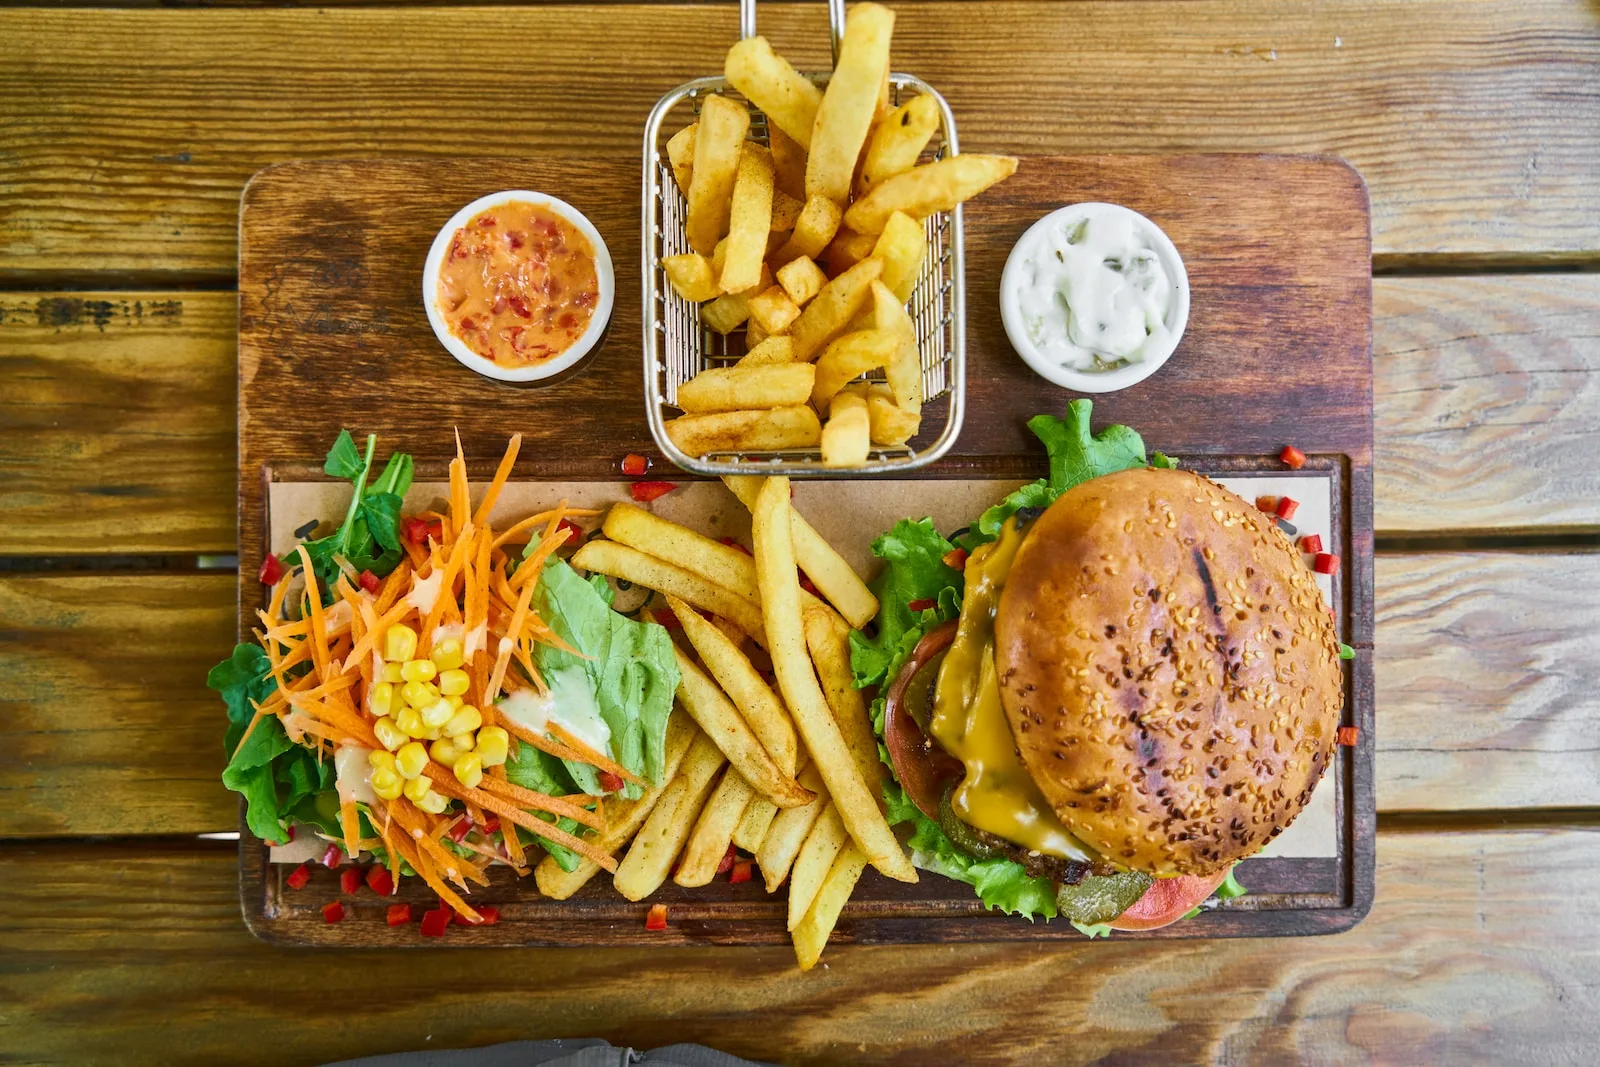 metabolism-boosters-fries-and-burger-on-brown-wooden-tray-carbohydrates